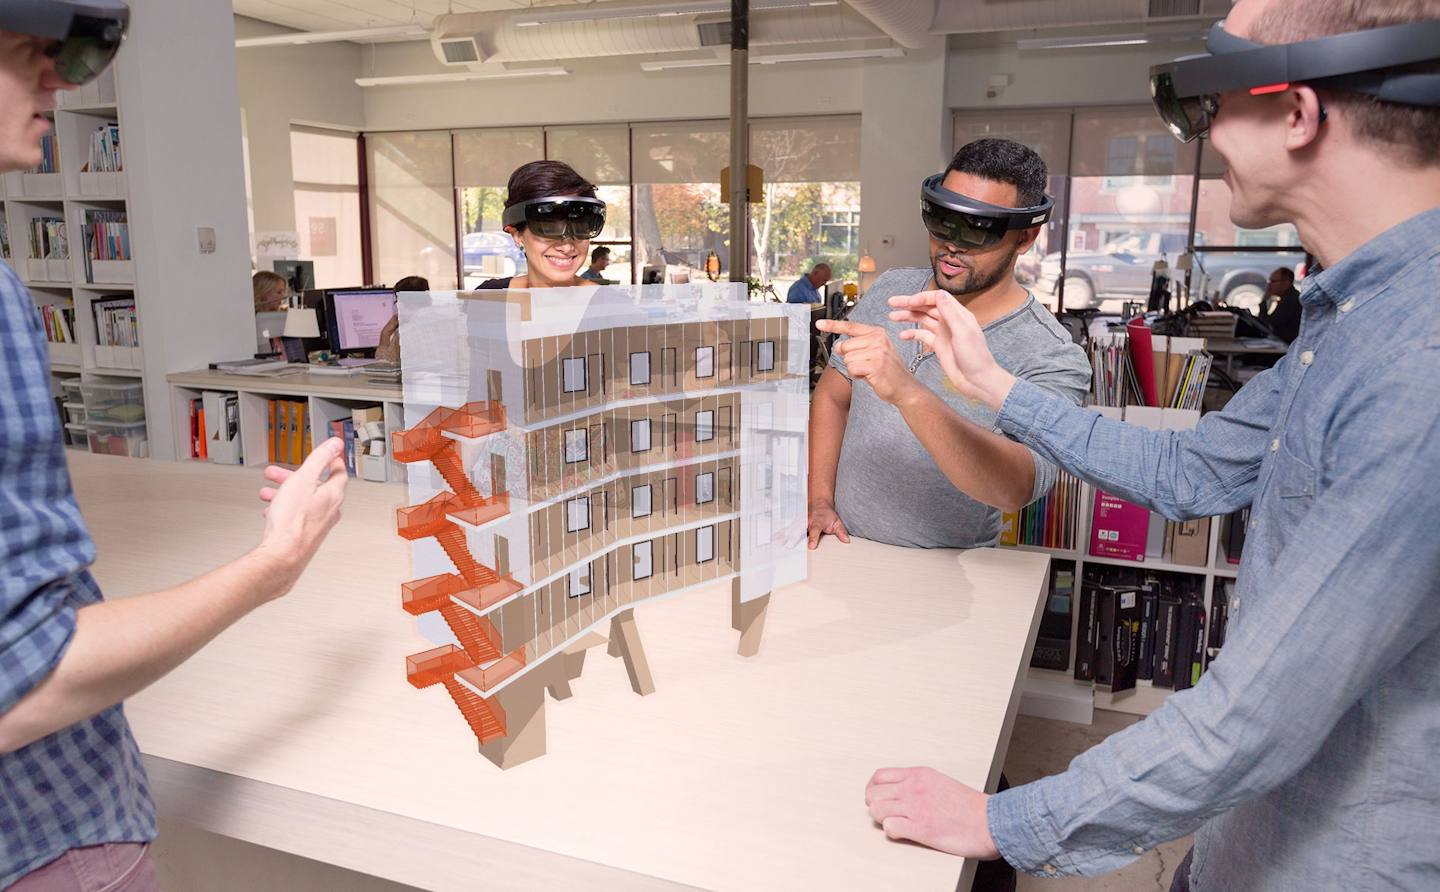 With Trimble’s HoloLens SketchUp Viewer, you can walk through a